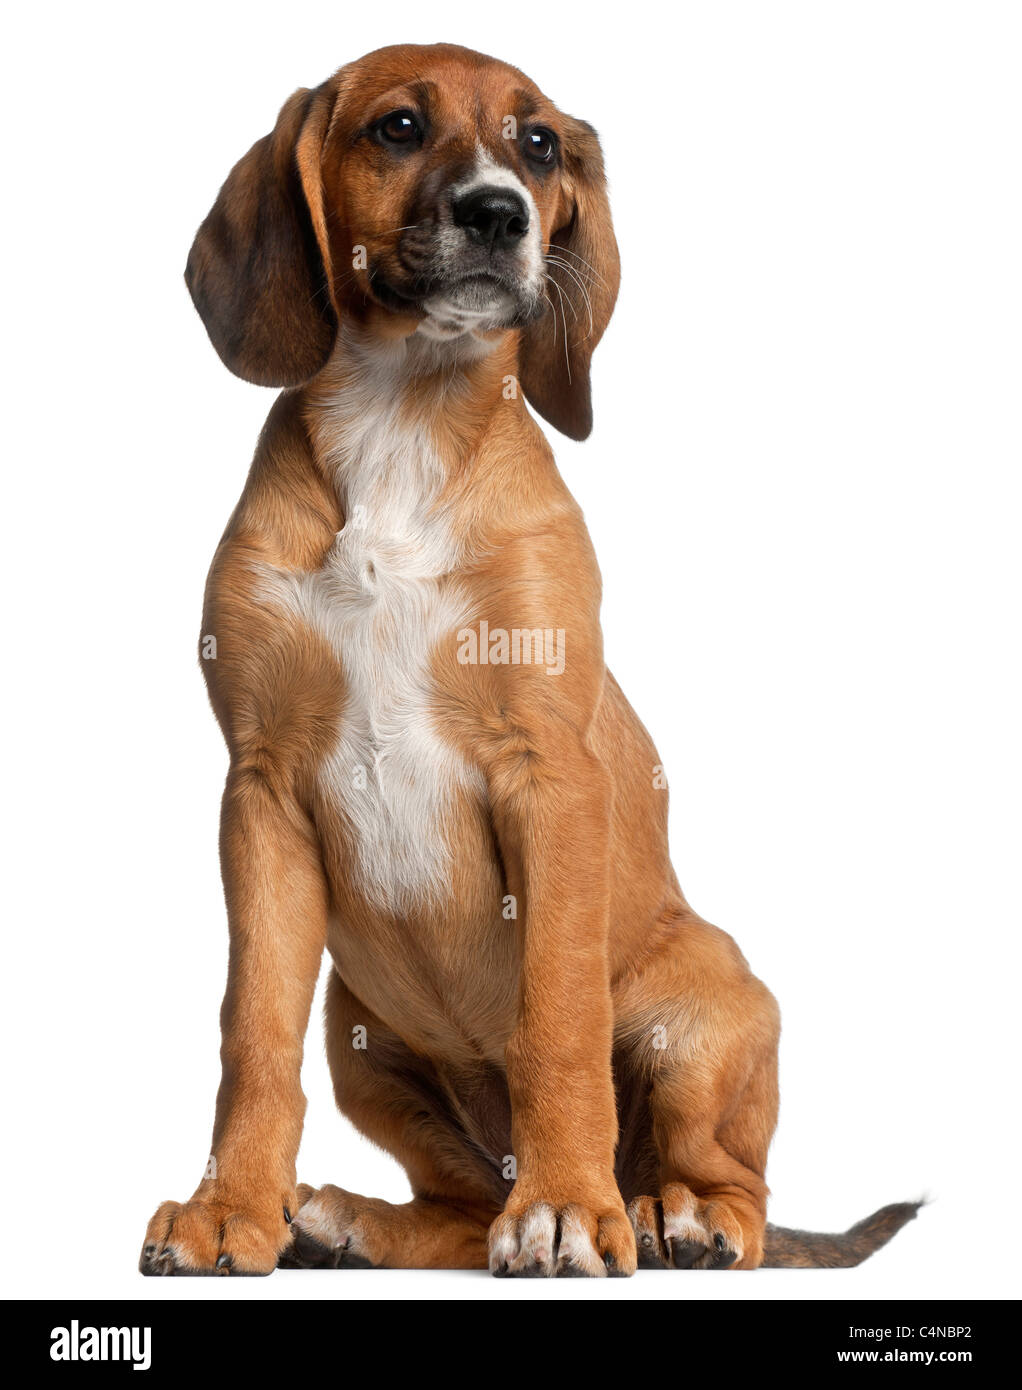 Mixed-breed puppy, 12 weeks old, sitting in front of white background Stock Photo